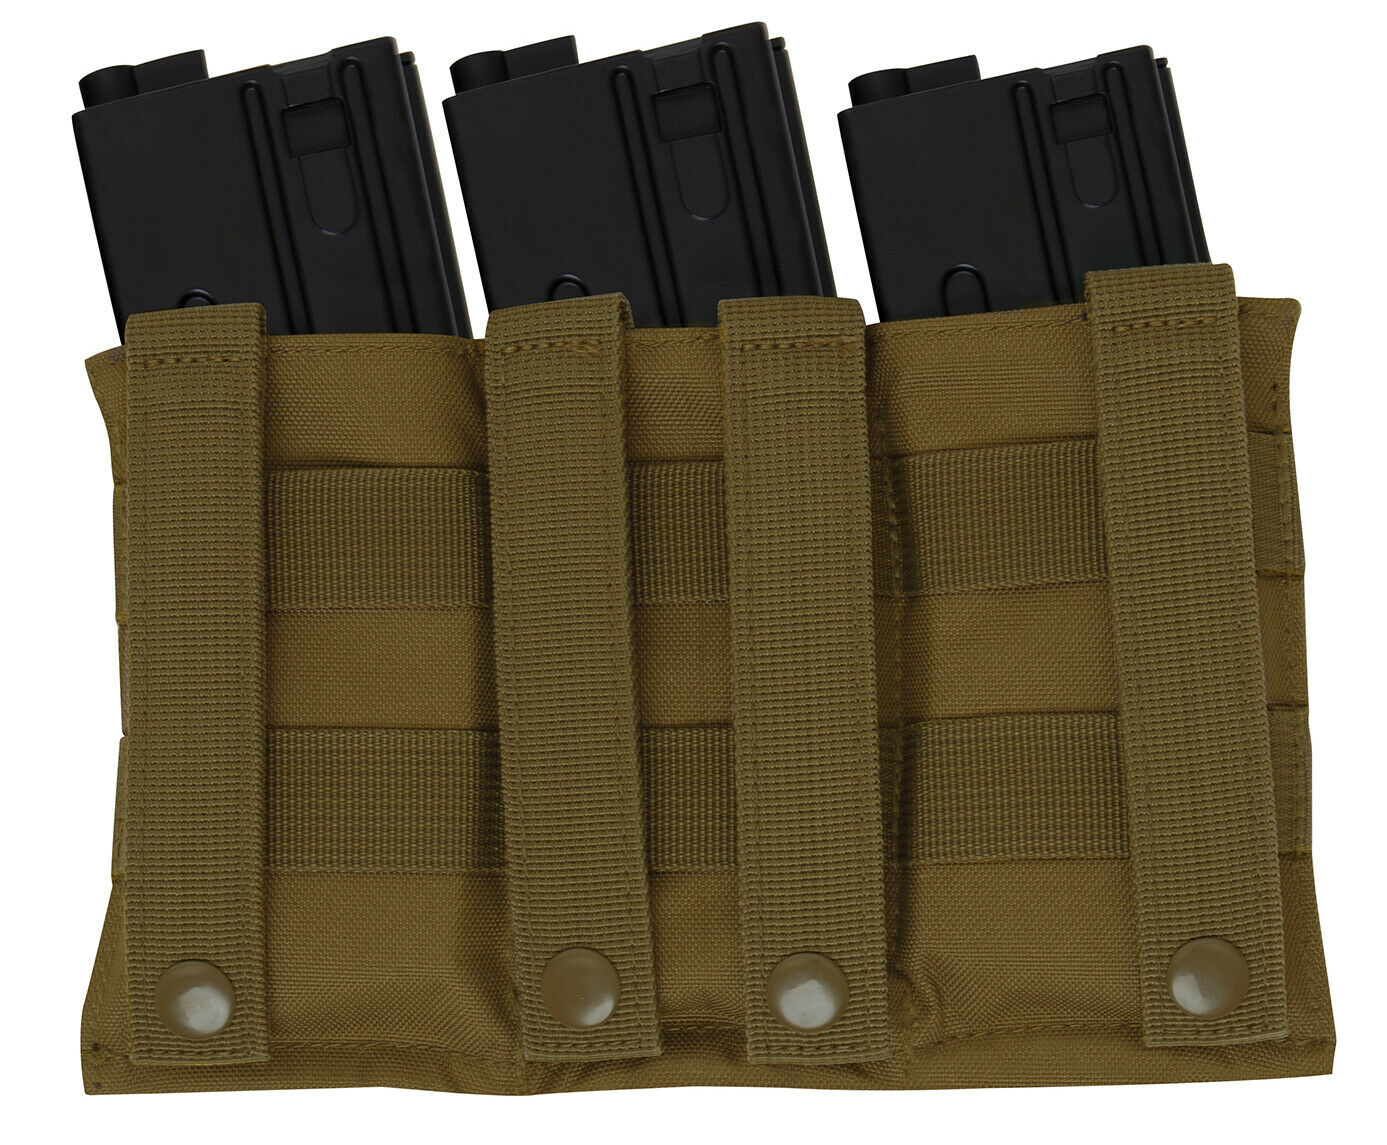 Rothco Lightweight 3 Mag Elastic Retention Pouch - Coyote Brown